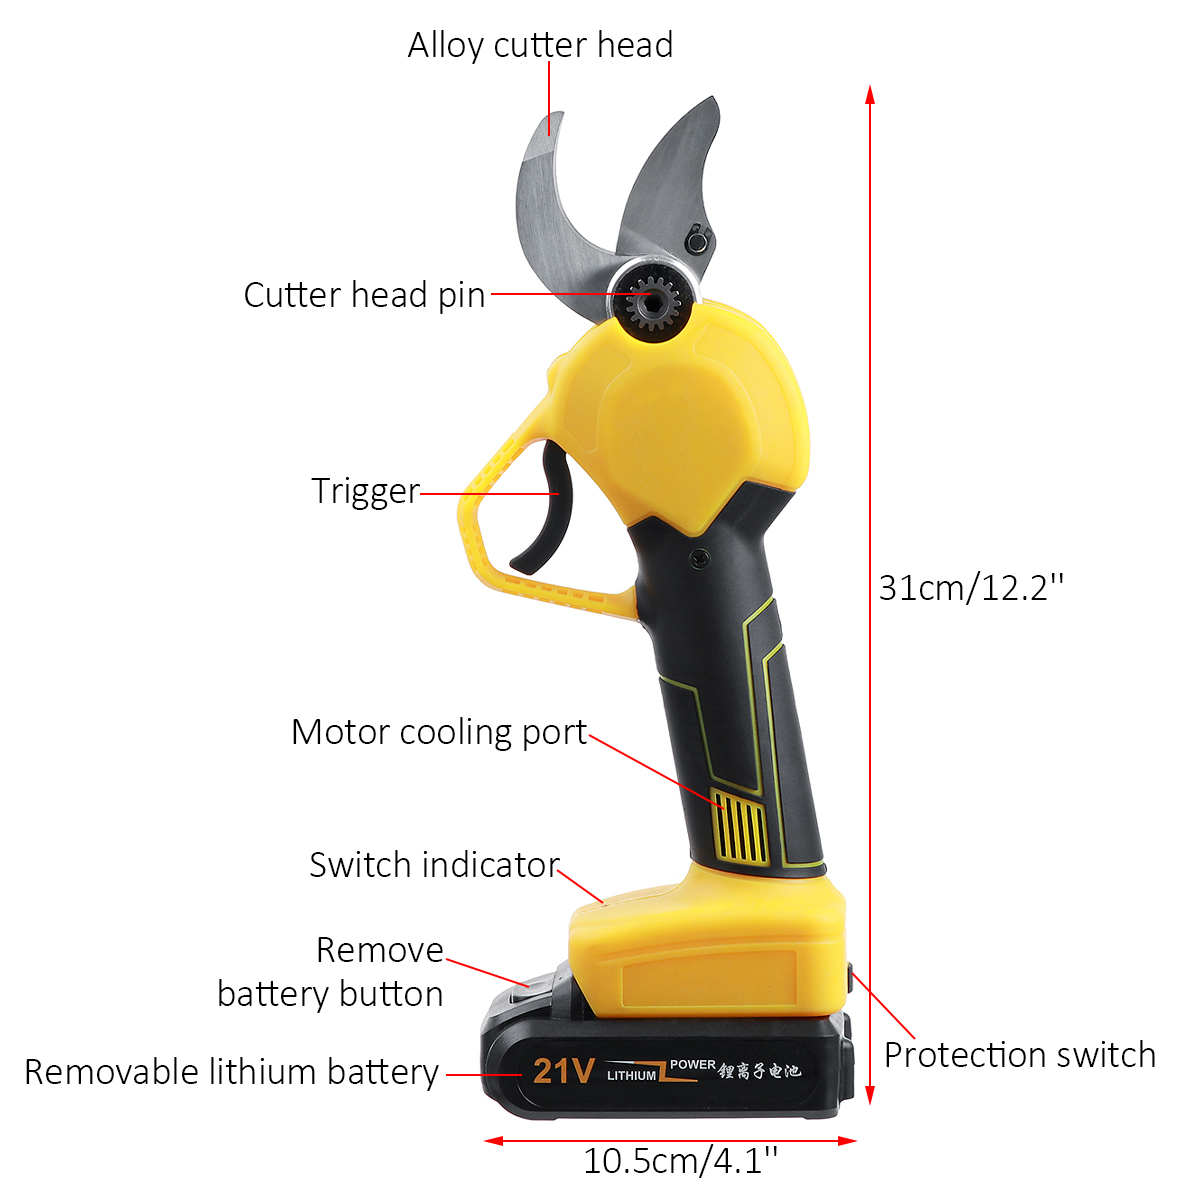 21V-30mm-Cordless-Electric-Pruning-Shears-Scissors-Rechargeable-Li-on-Battery-Garden-1803100-8